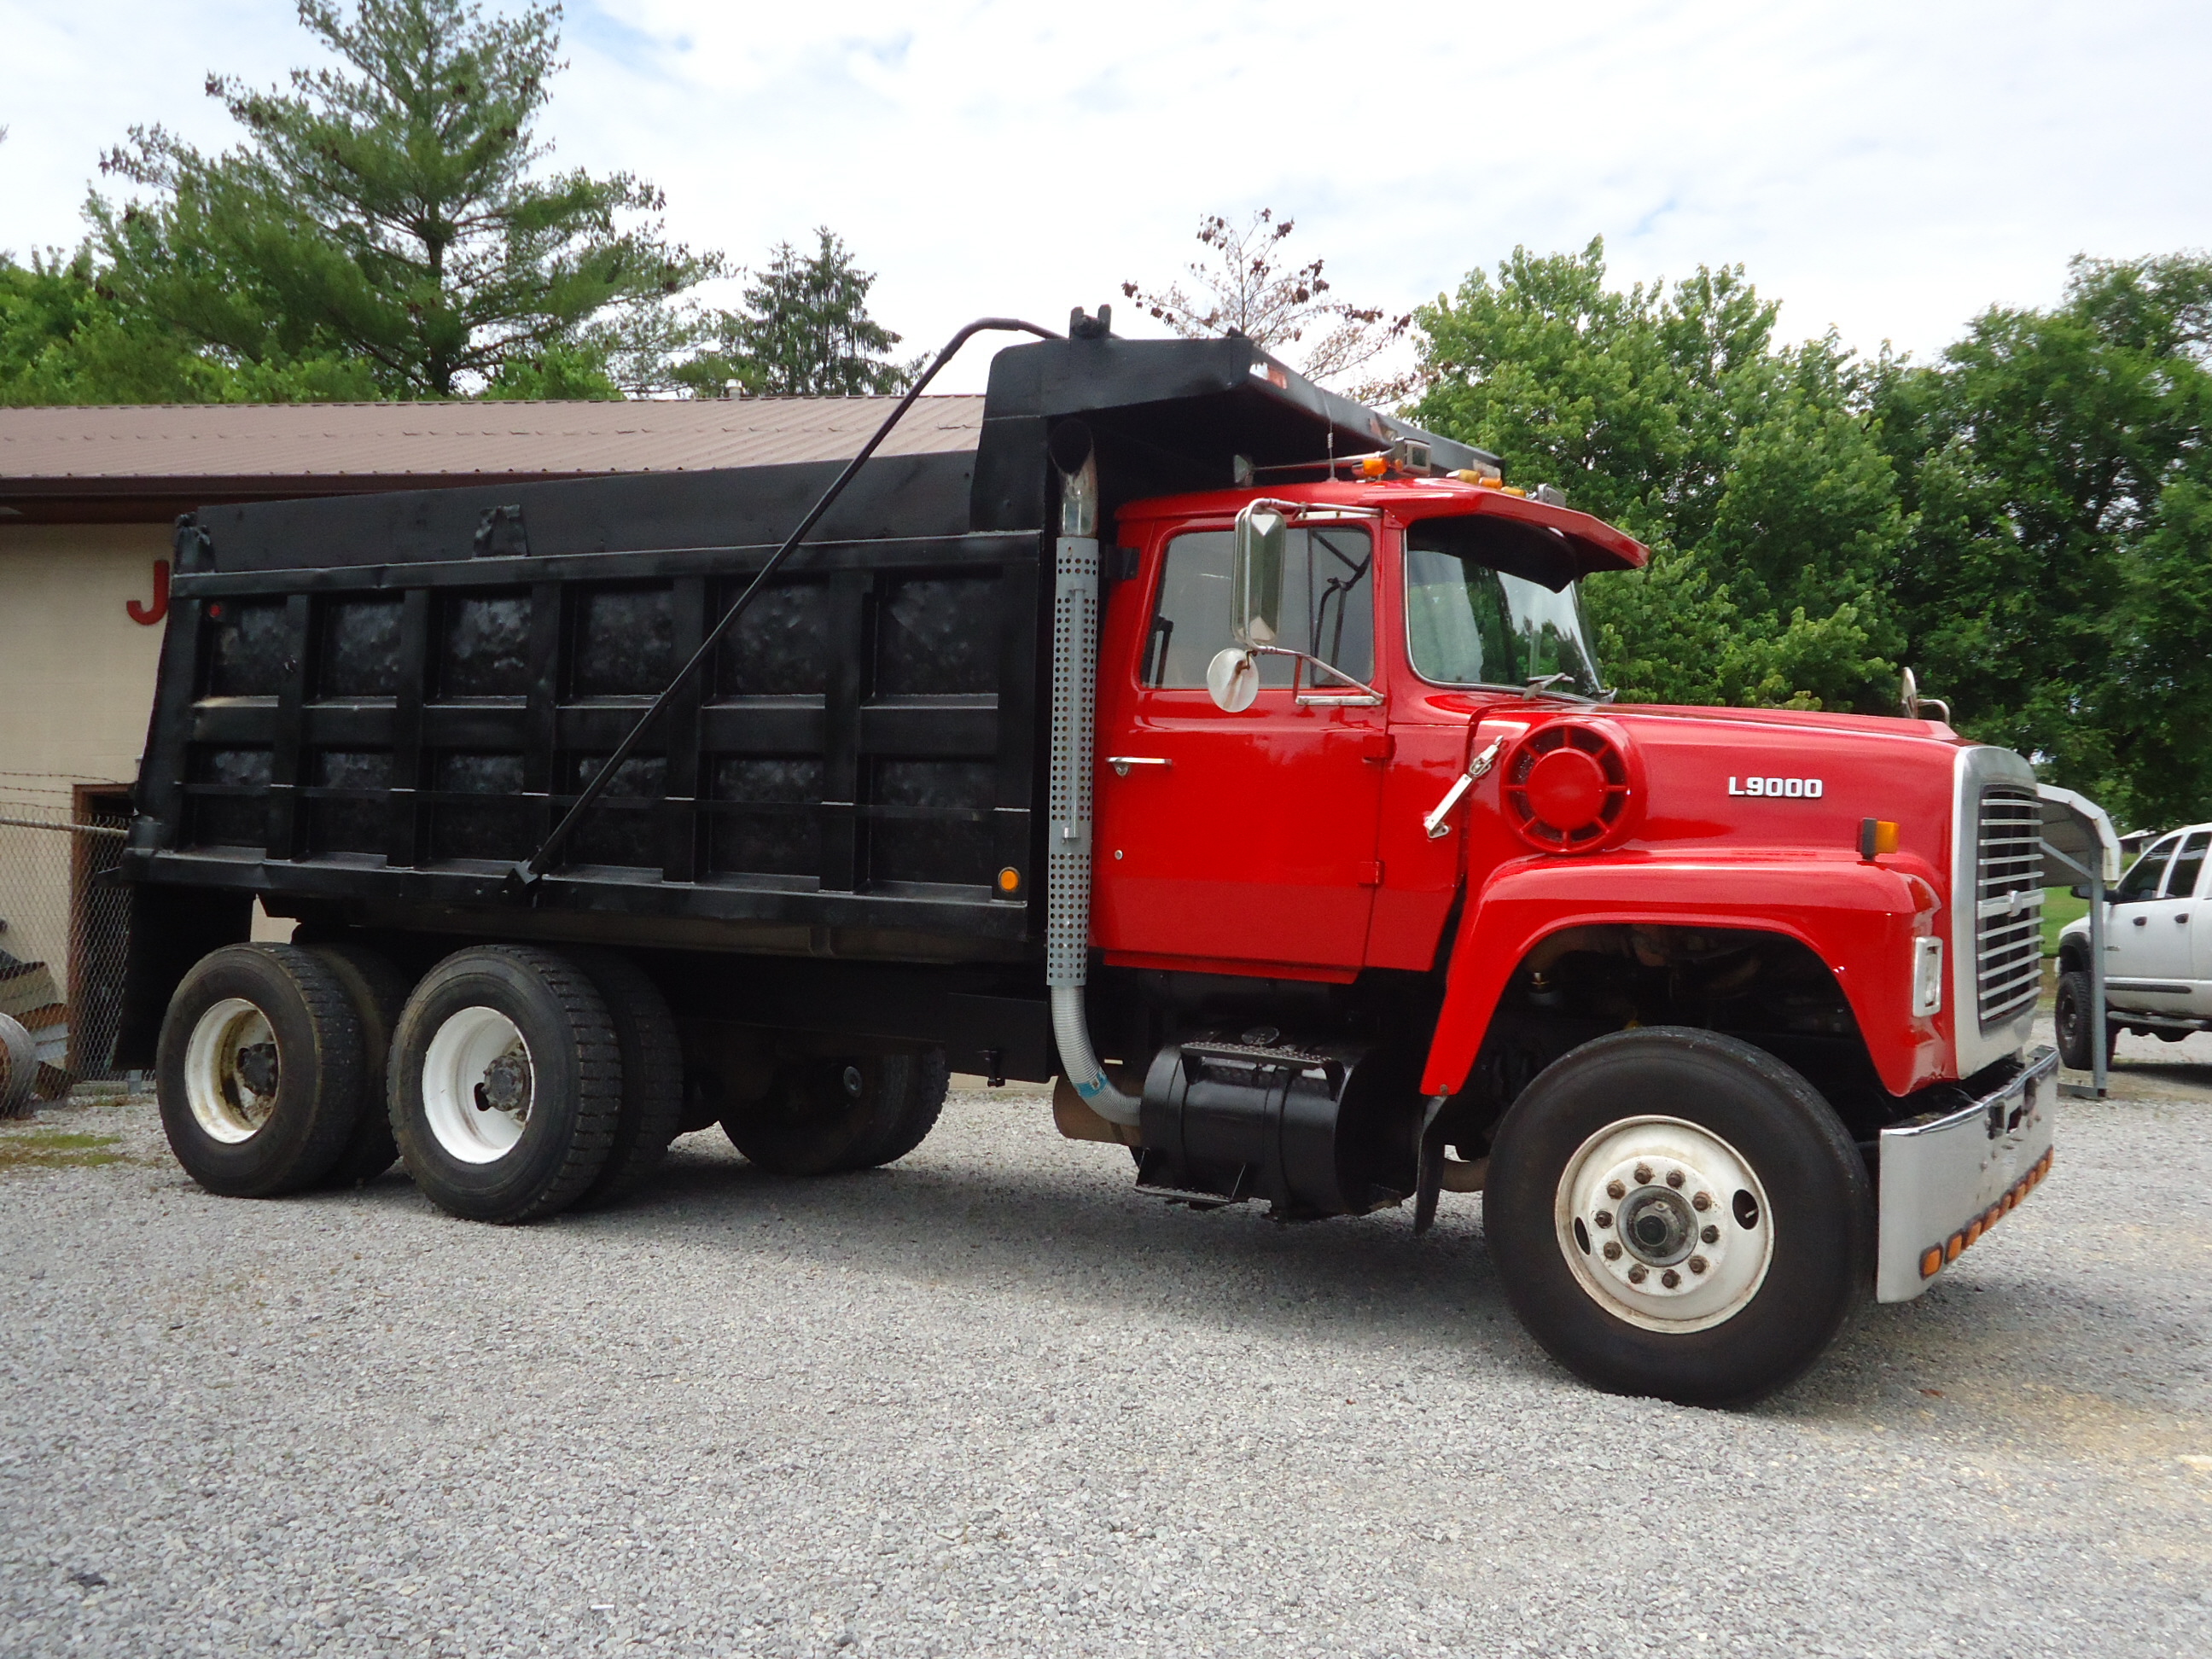 1989 Ford l9000 parts #1